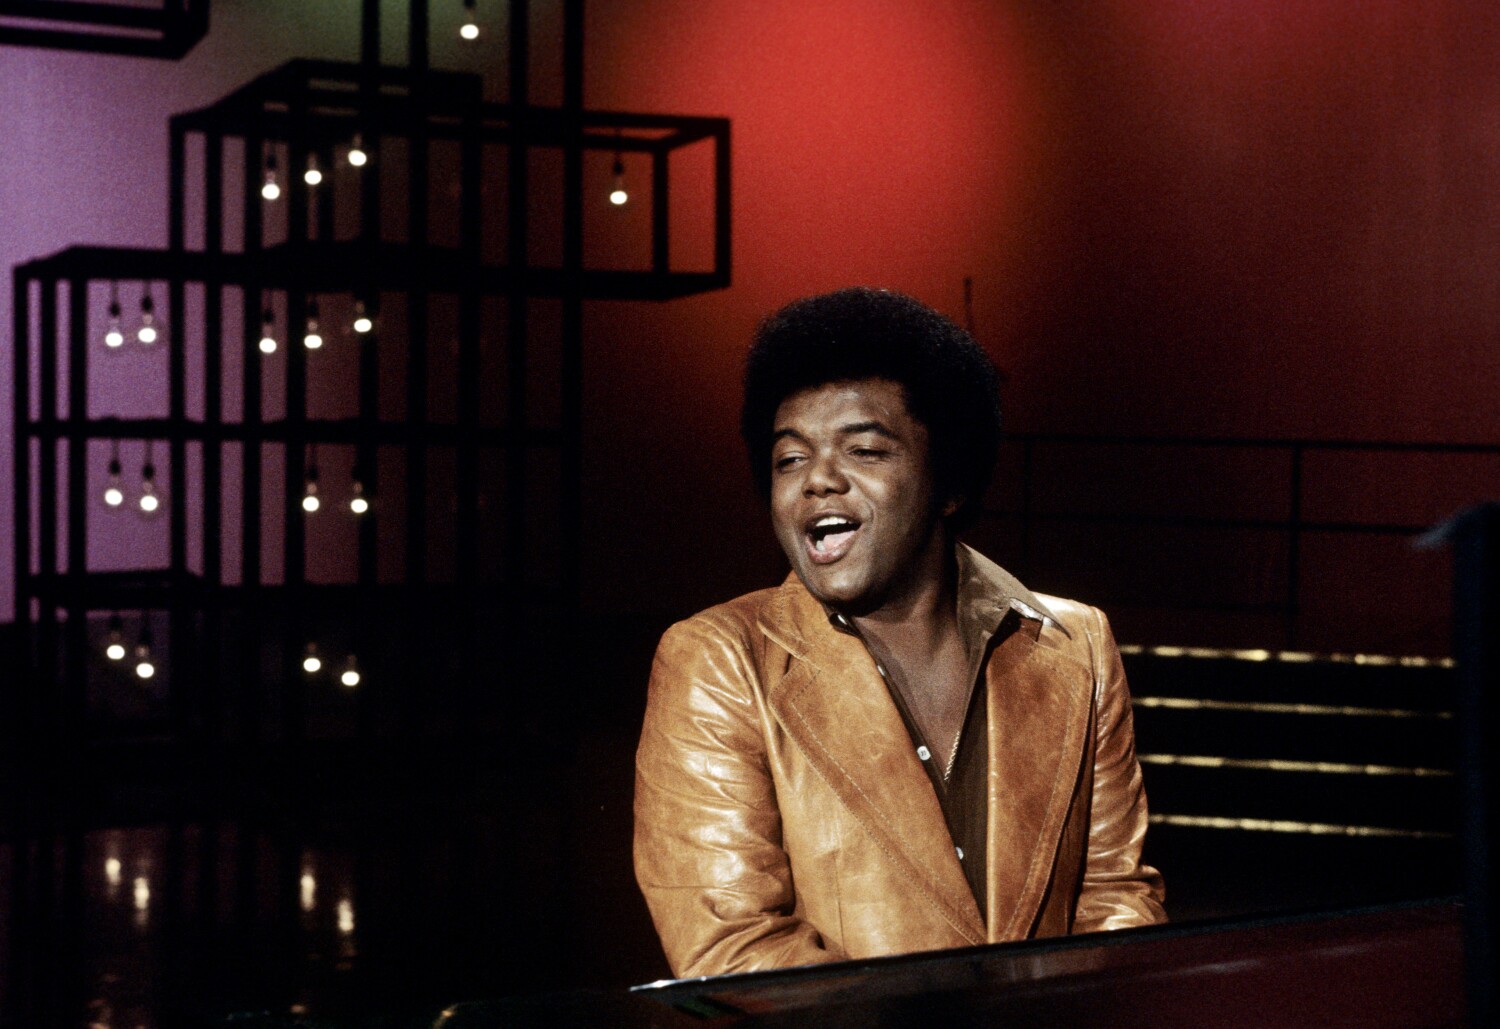 Lamont Dozier: An appreciation of a song craftsman who wrote hits with heart and soul